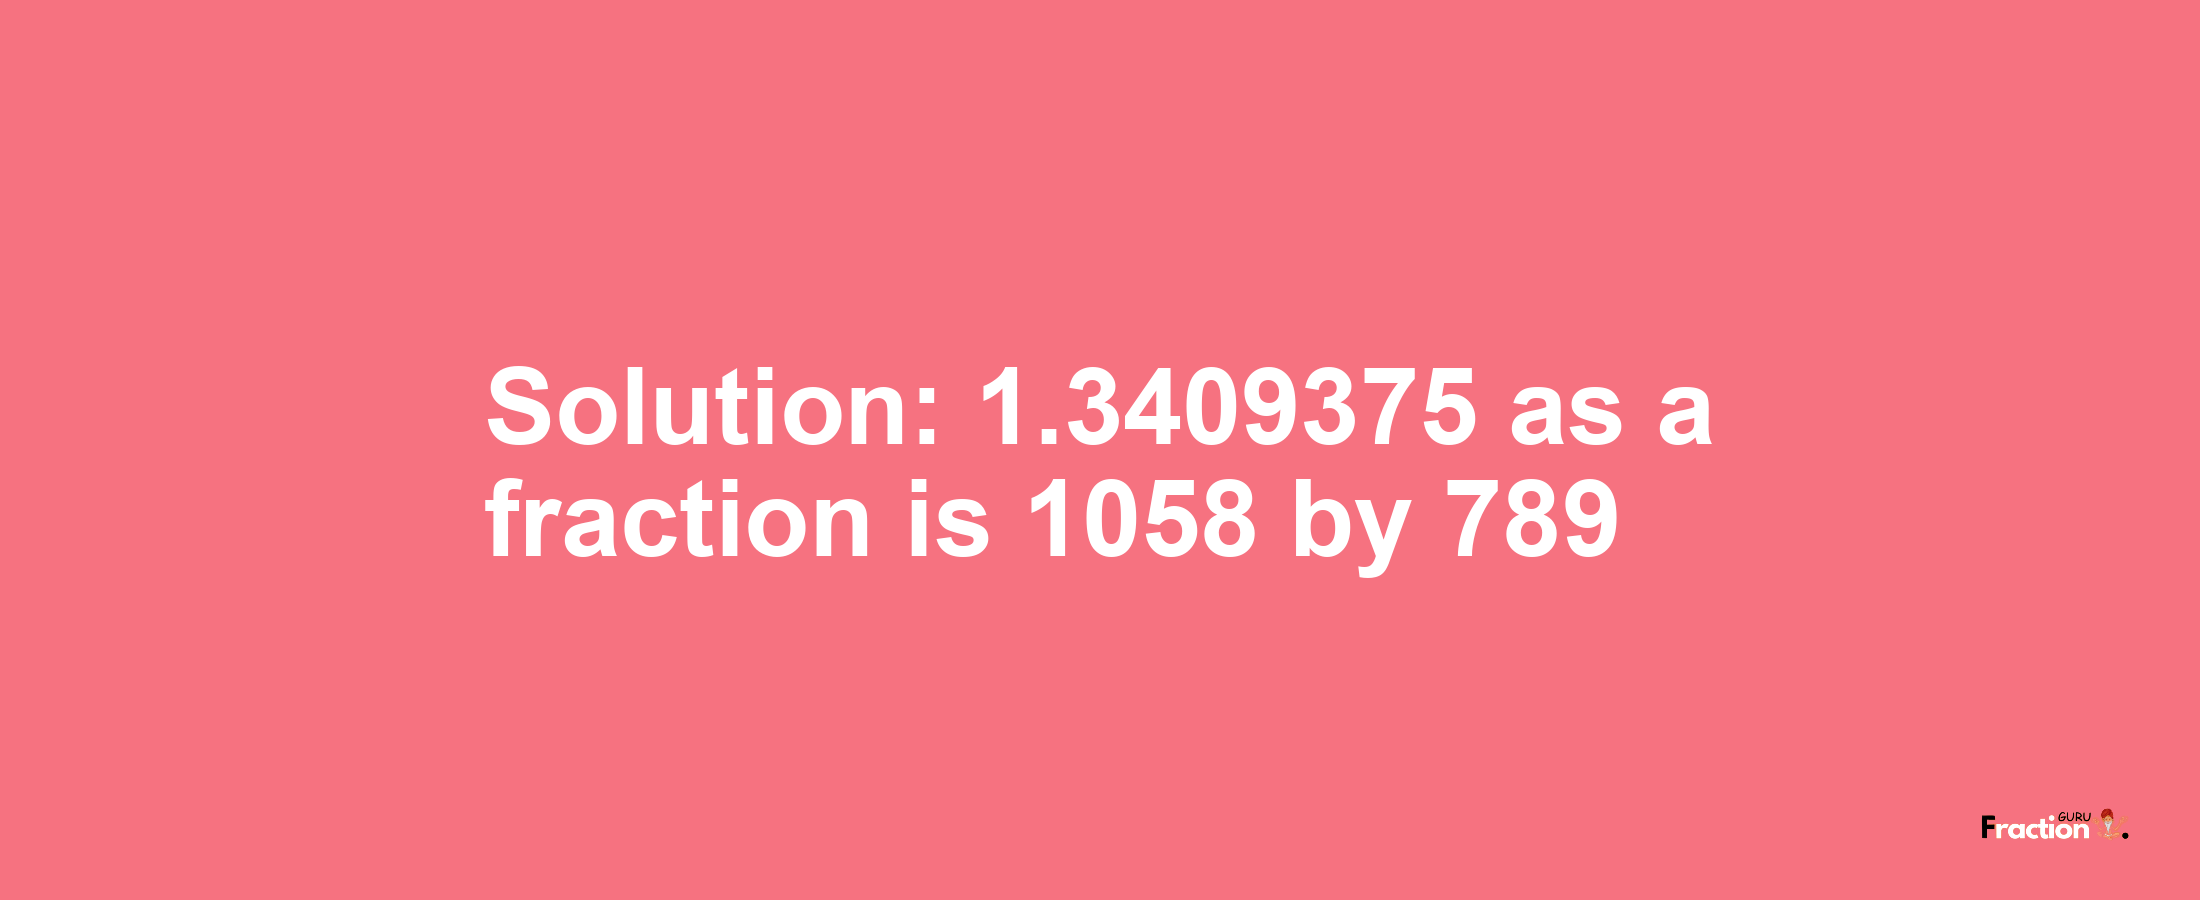 Solution:1.3409375 as a fraction is 1058/789